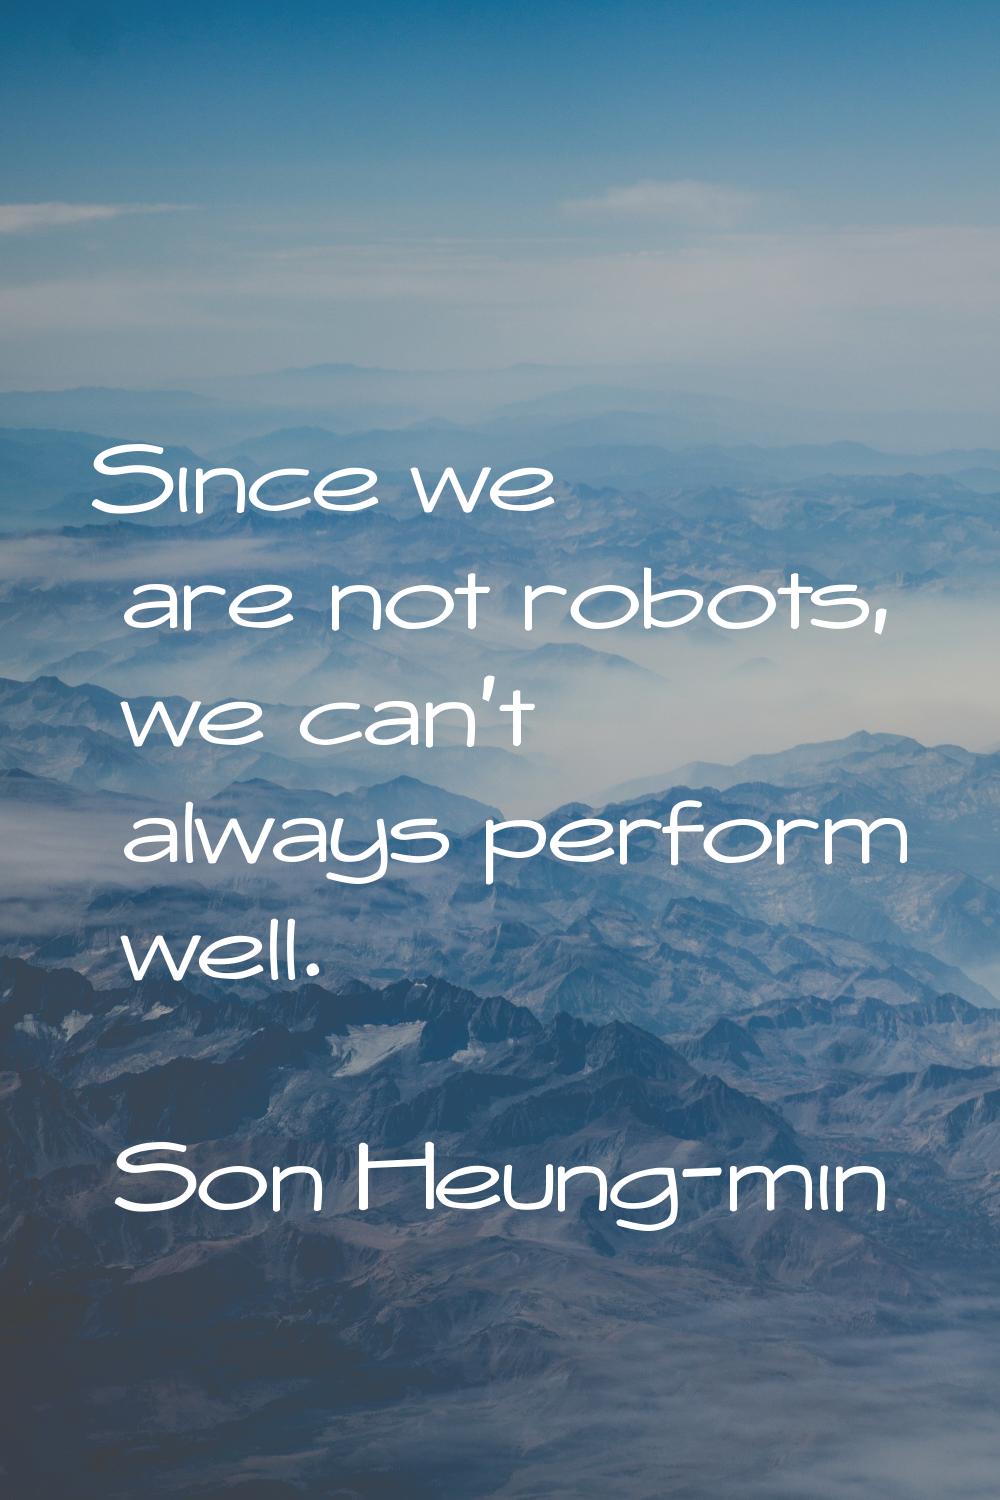 Since we are not robots, we can't always perform well.